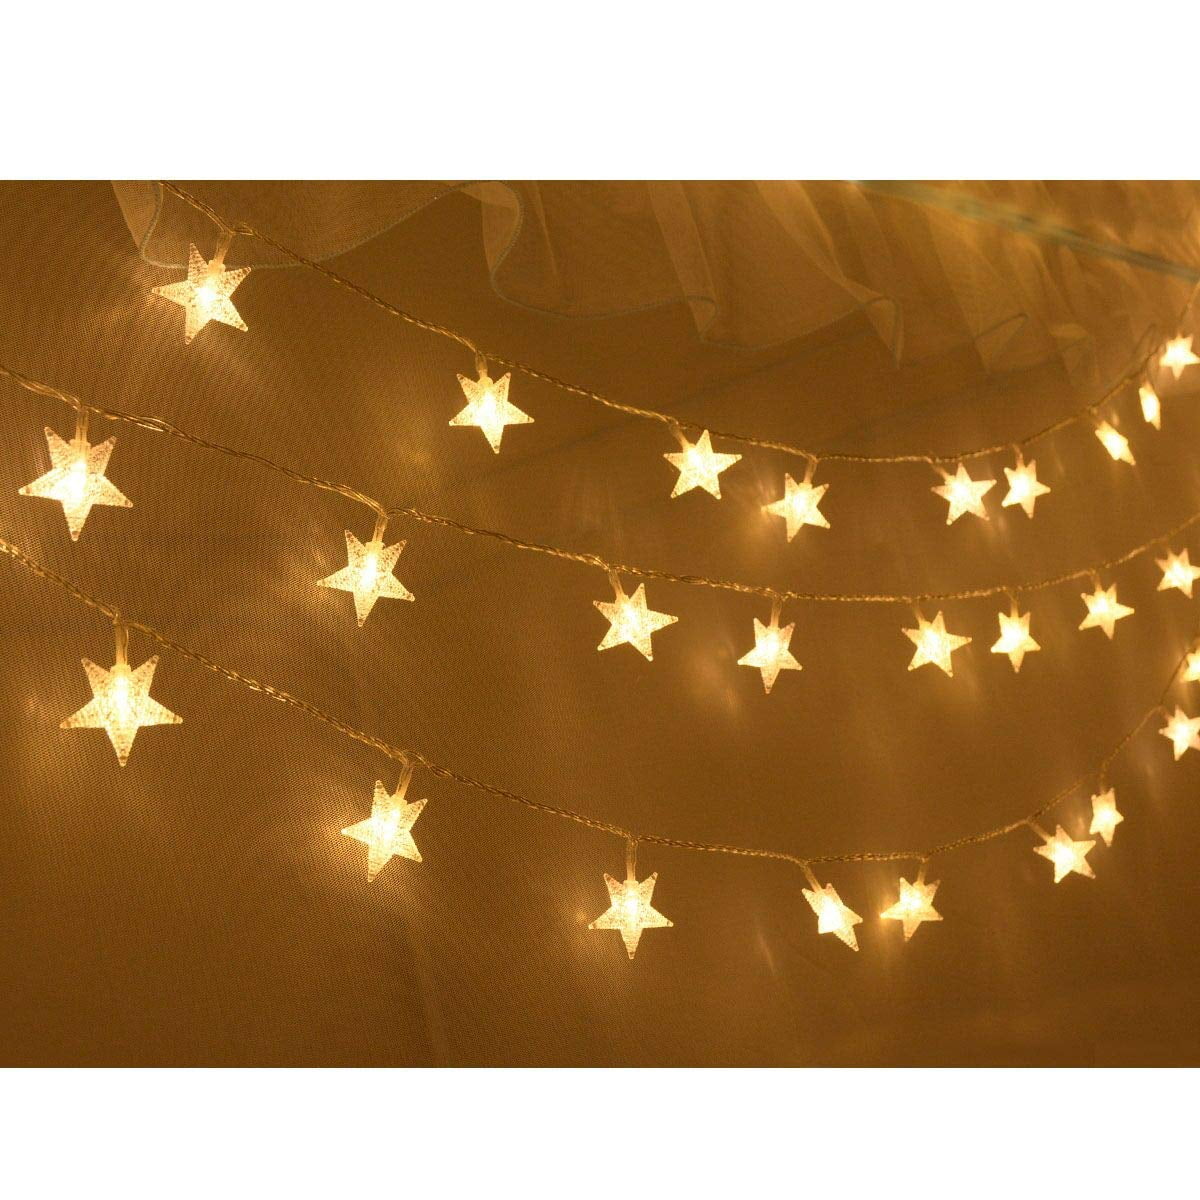 Details about   1.5*1.5M Mesh LED Net Fairy String Curtain Light Party Room Outdoor Indoor Decor 